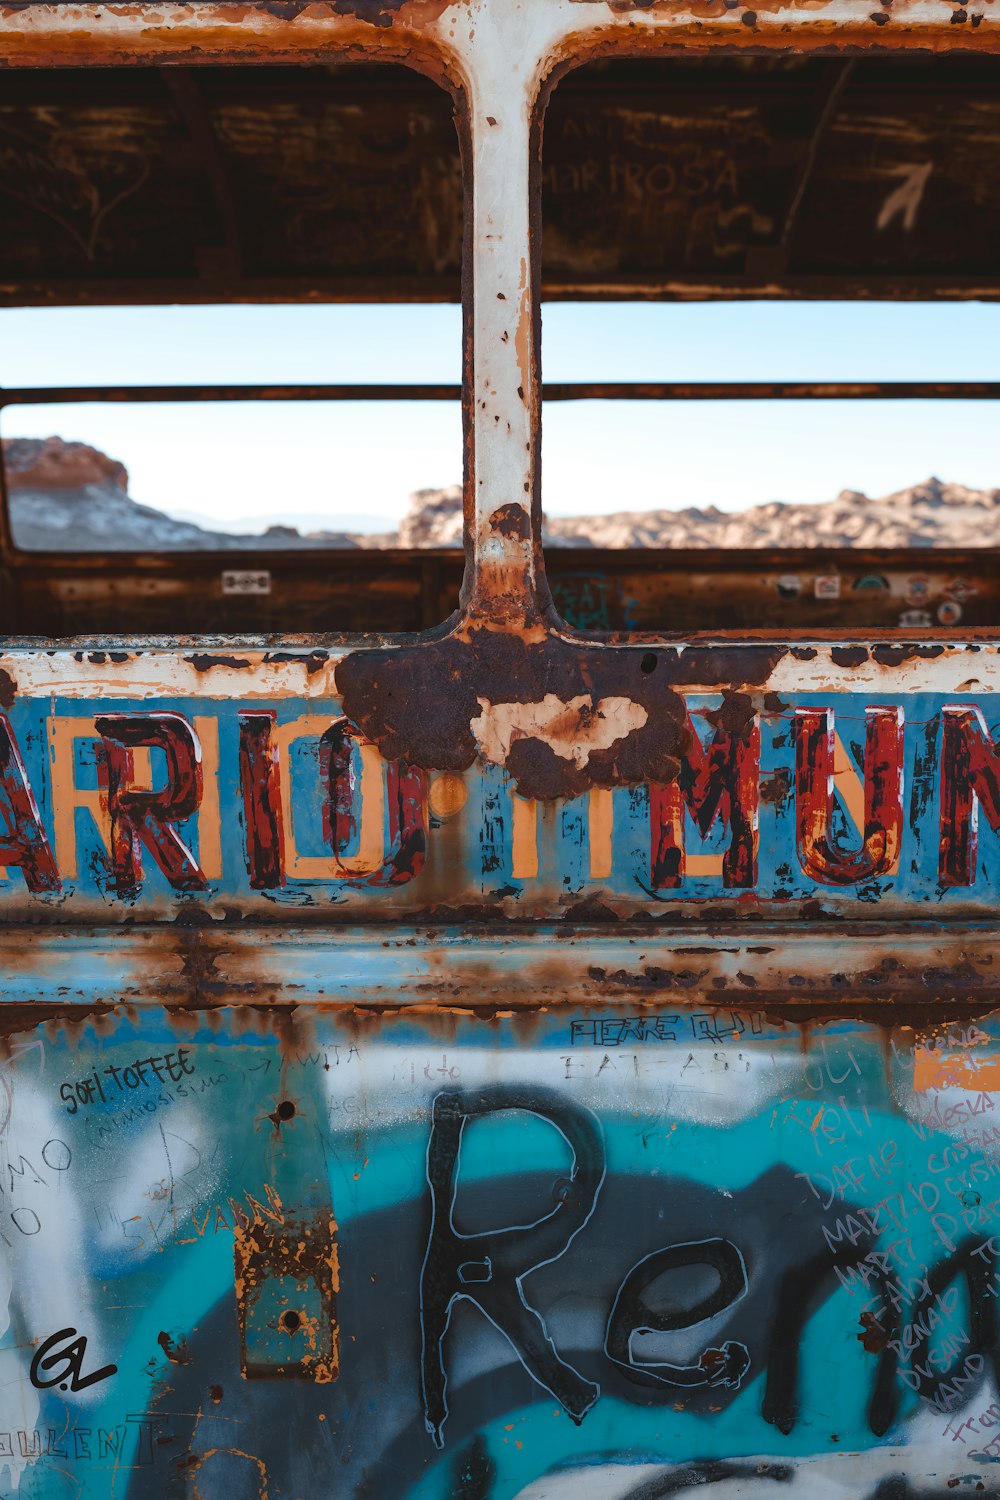 a rusted out bus with graffiti on it